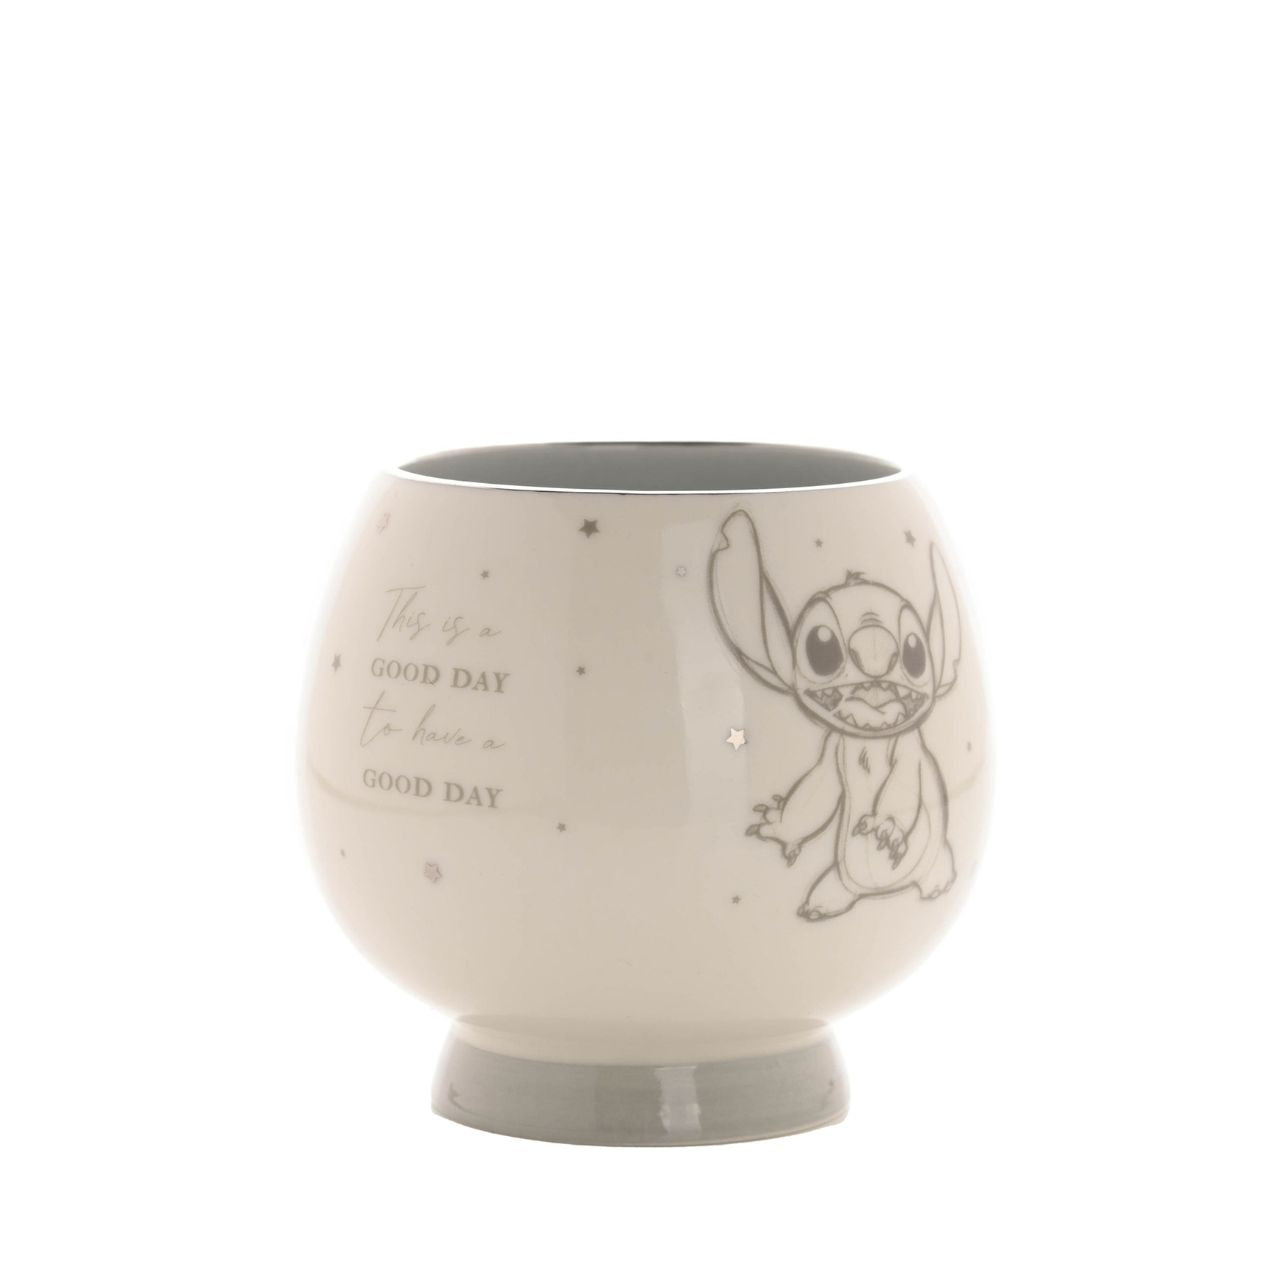 Disney 100th Anniversary Premium Mug - Stitch  A Stitch premium mug from Disney 100 by DISNEY.  This limited edition mug captures the true magic of Disney on its centenary and can be enjoyed by fans of all ages.